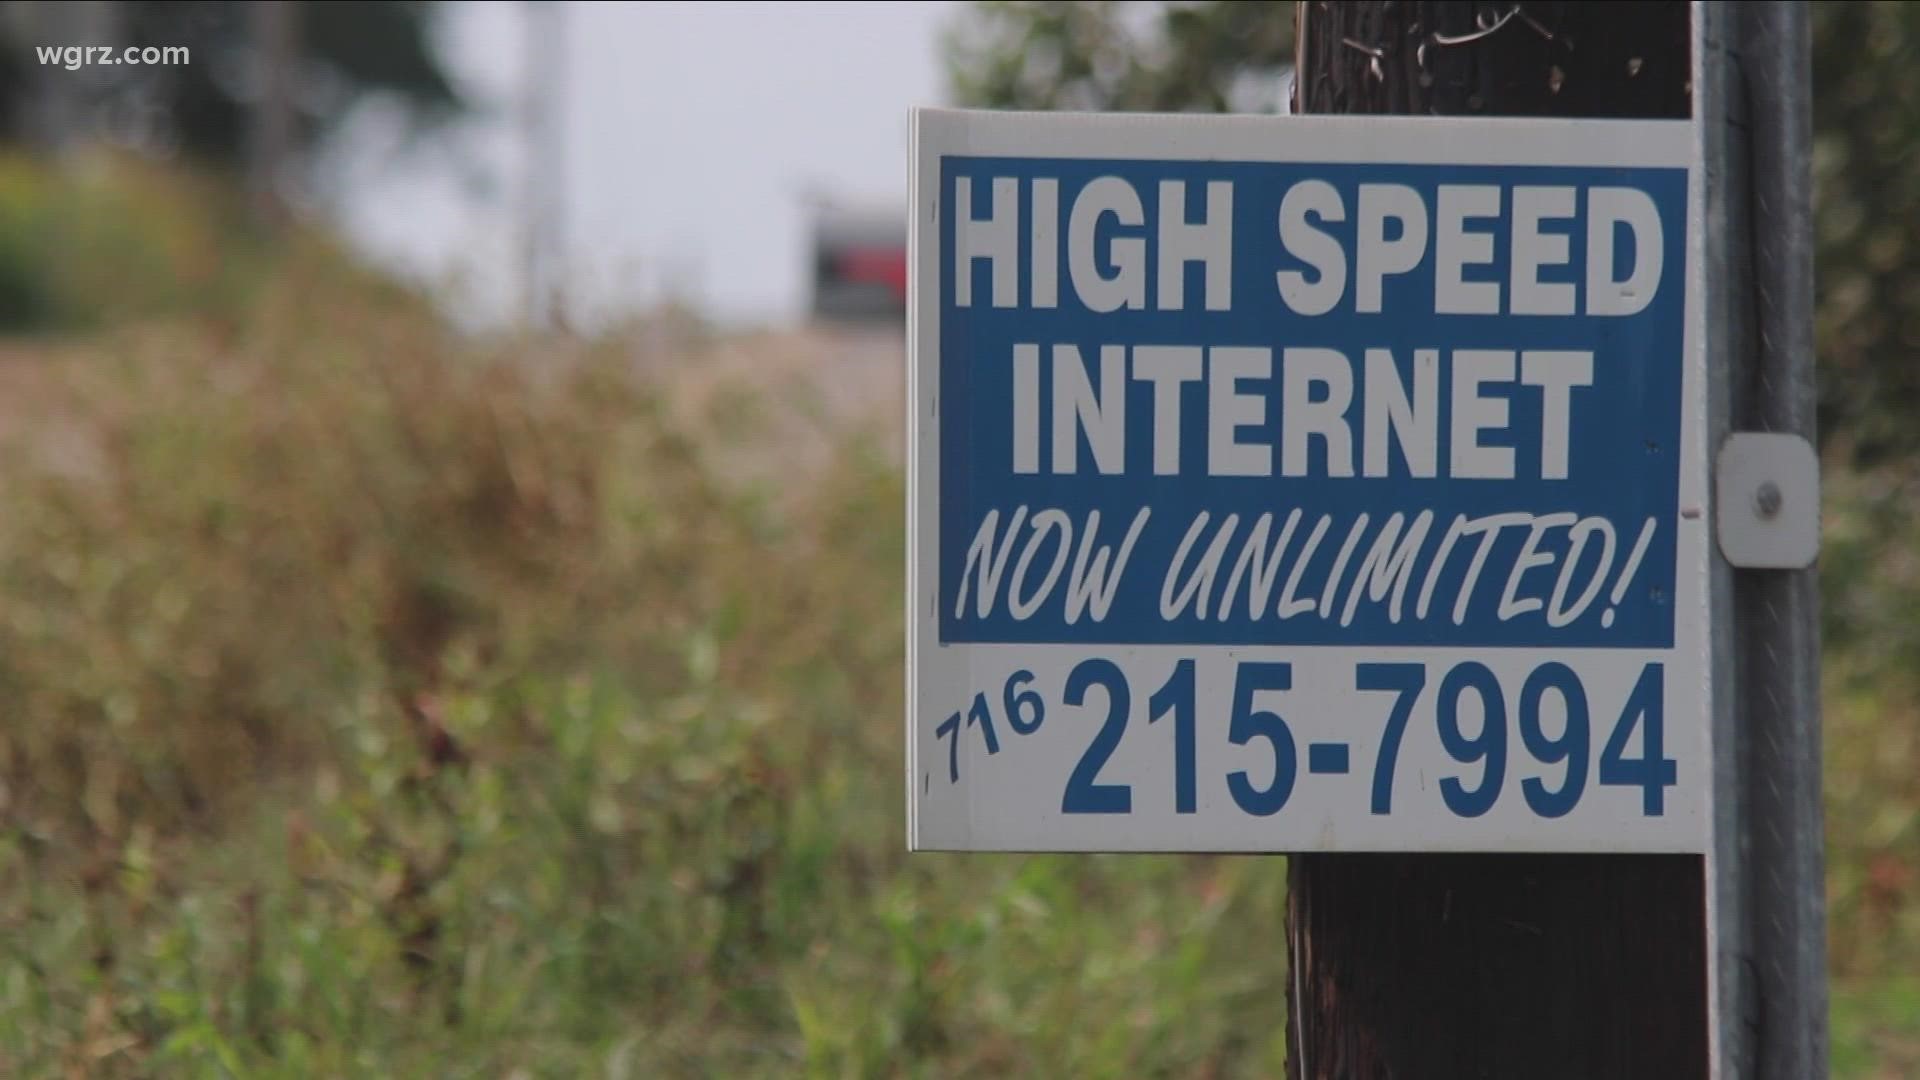 The state comptroller's office issued a report suggesting more than a million households in the state still lack high-speed internet.